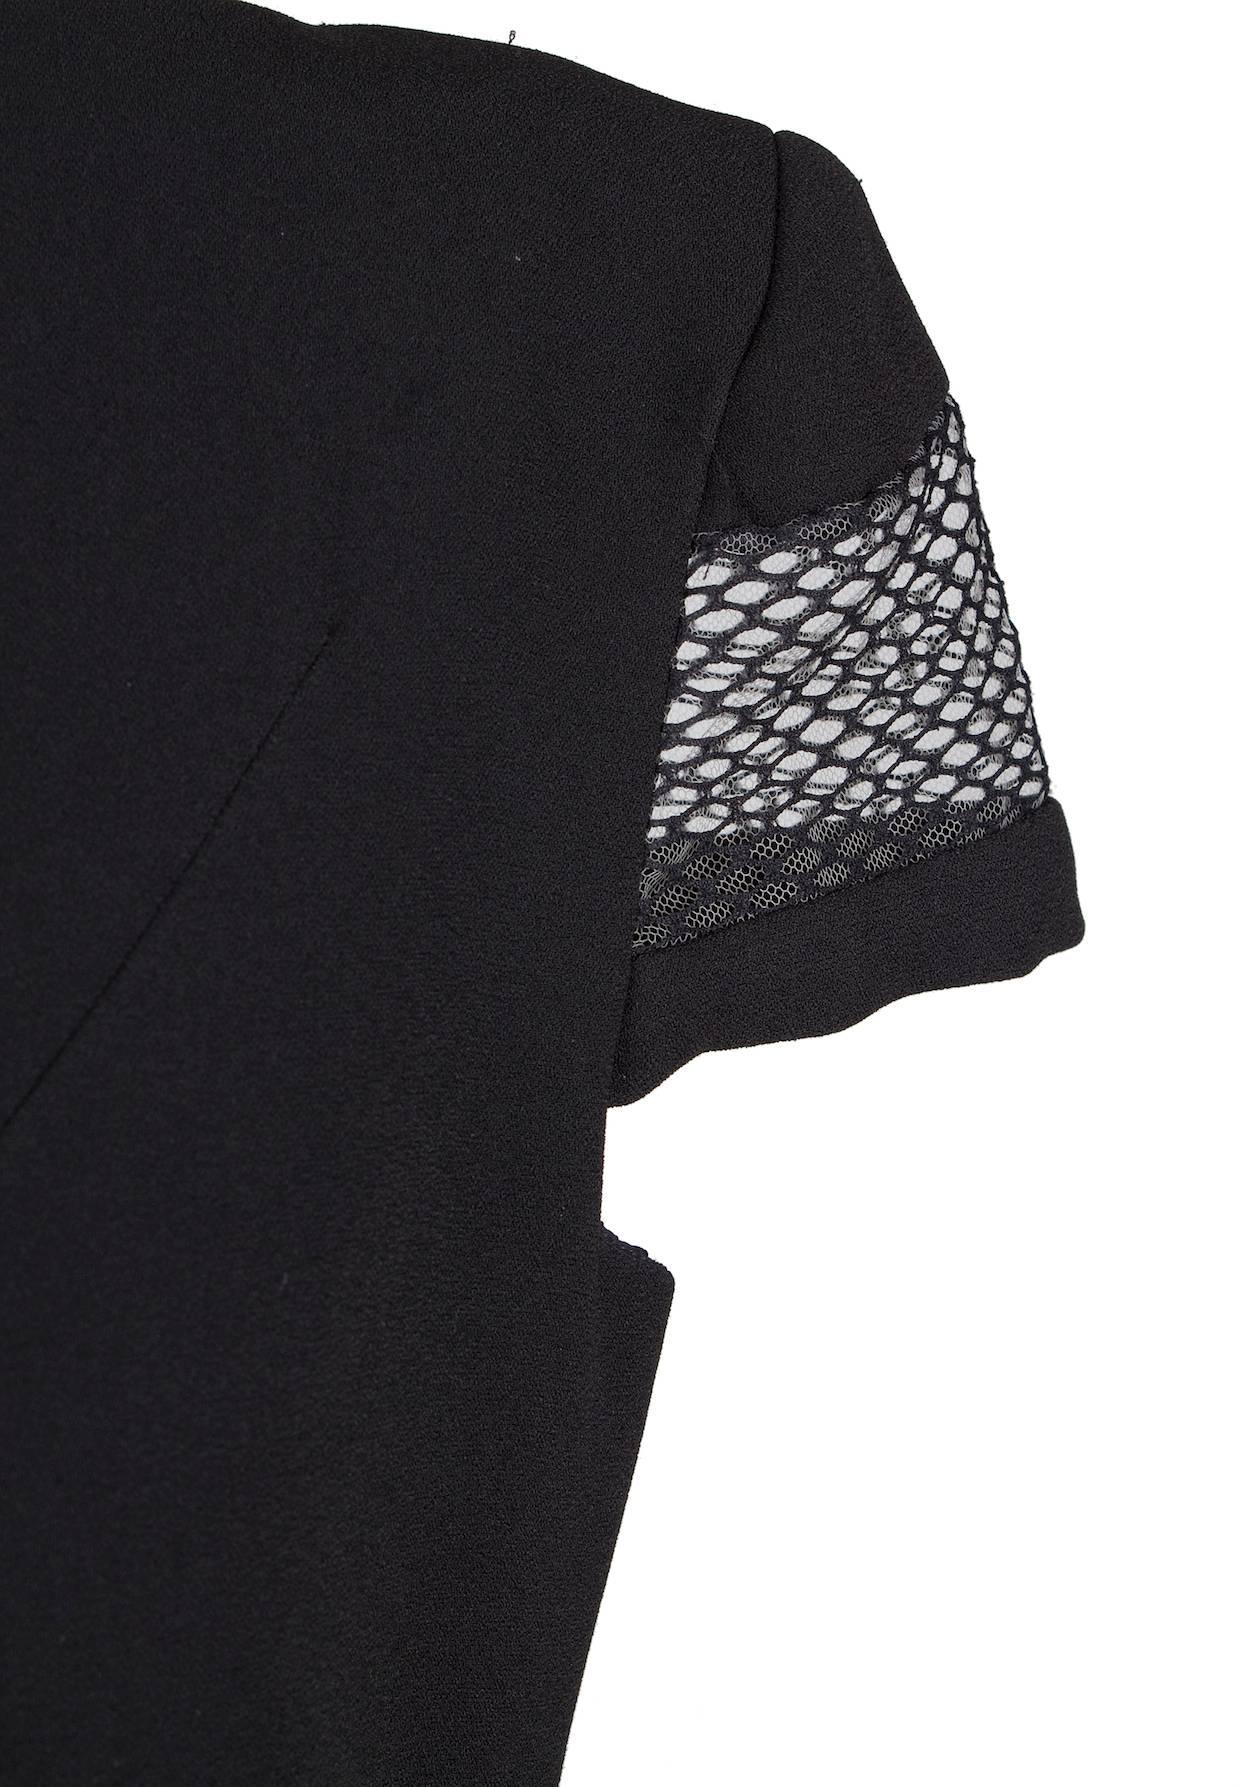 Jean Paul Gaultier Black Sheath Dress with Mesh Panels circa 1980s In Excellent Condition In Los Angeles, CA